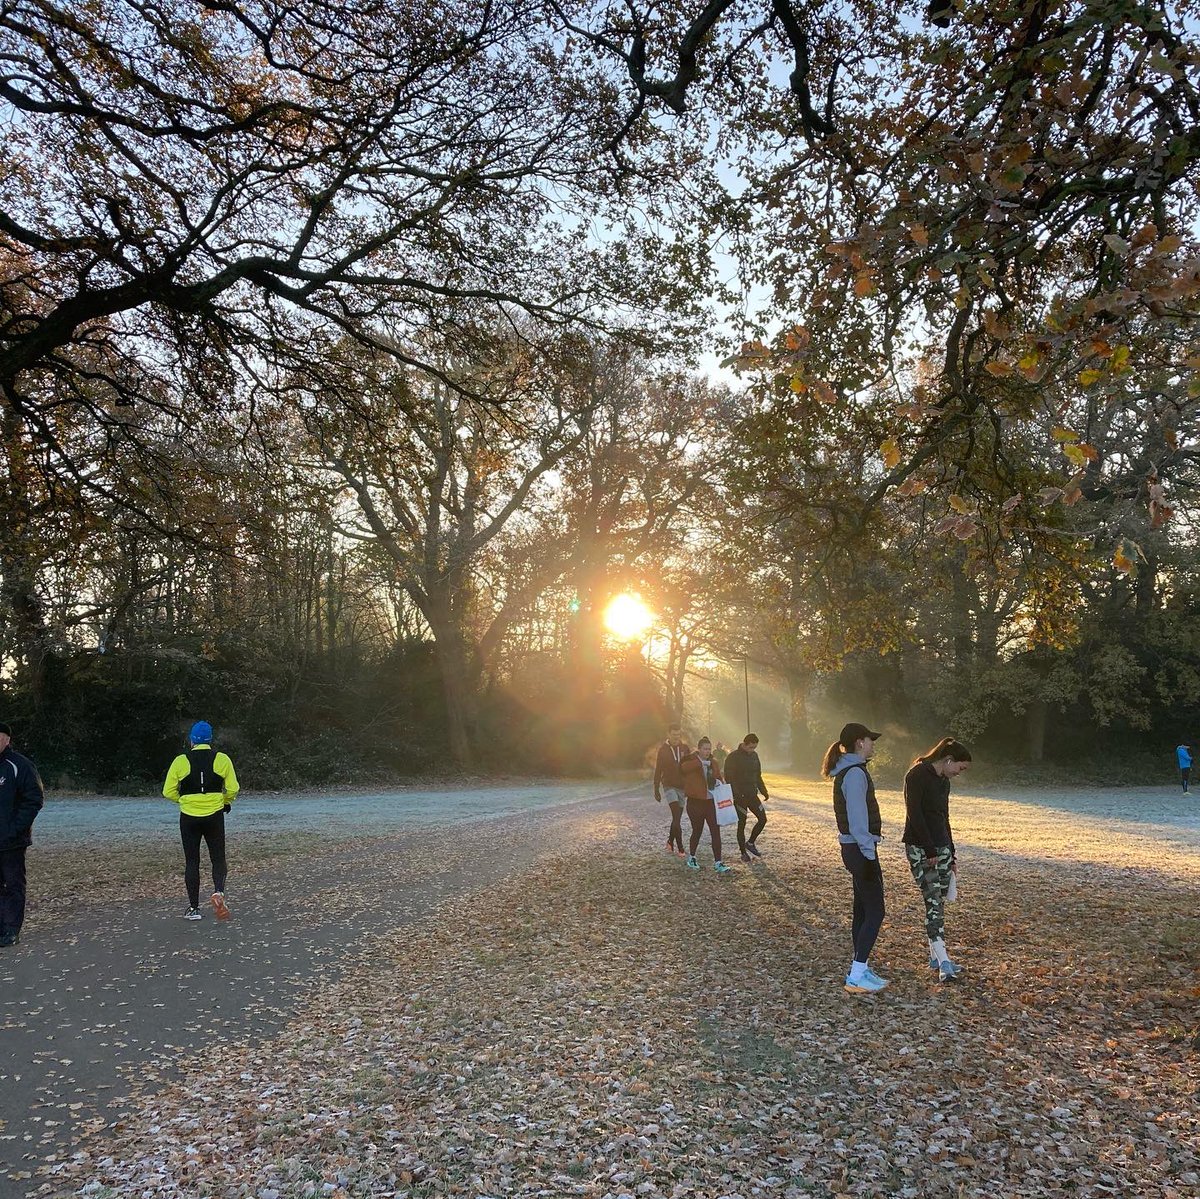 A beautiful but very chilly morning for @Sotonparkrun , very chuffed to get a pb by 43 seconds. Took a bit of focus, minus temperatures and Cp aren't the best mix. @HamwicHarriers #betterthanbefore #getoutside @parkrunUK #loveparkrun #cerebralpalsy #cprunner @Weldmar